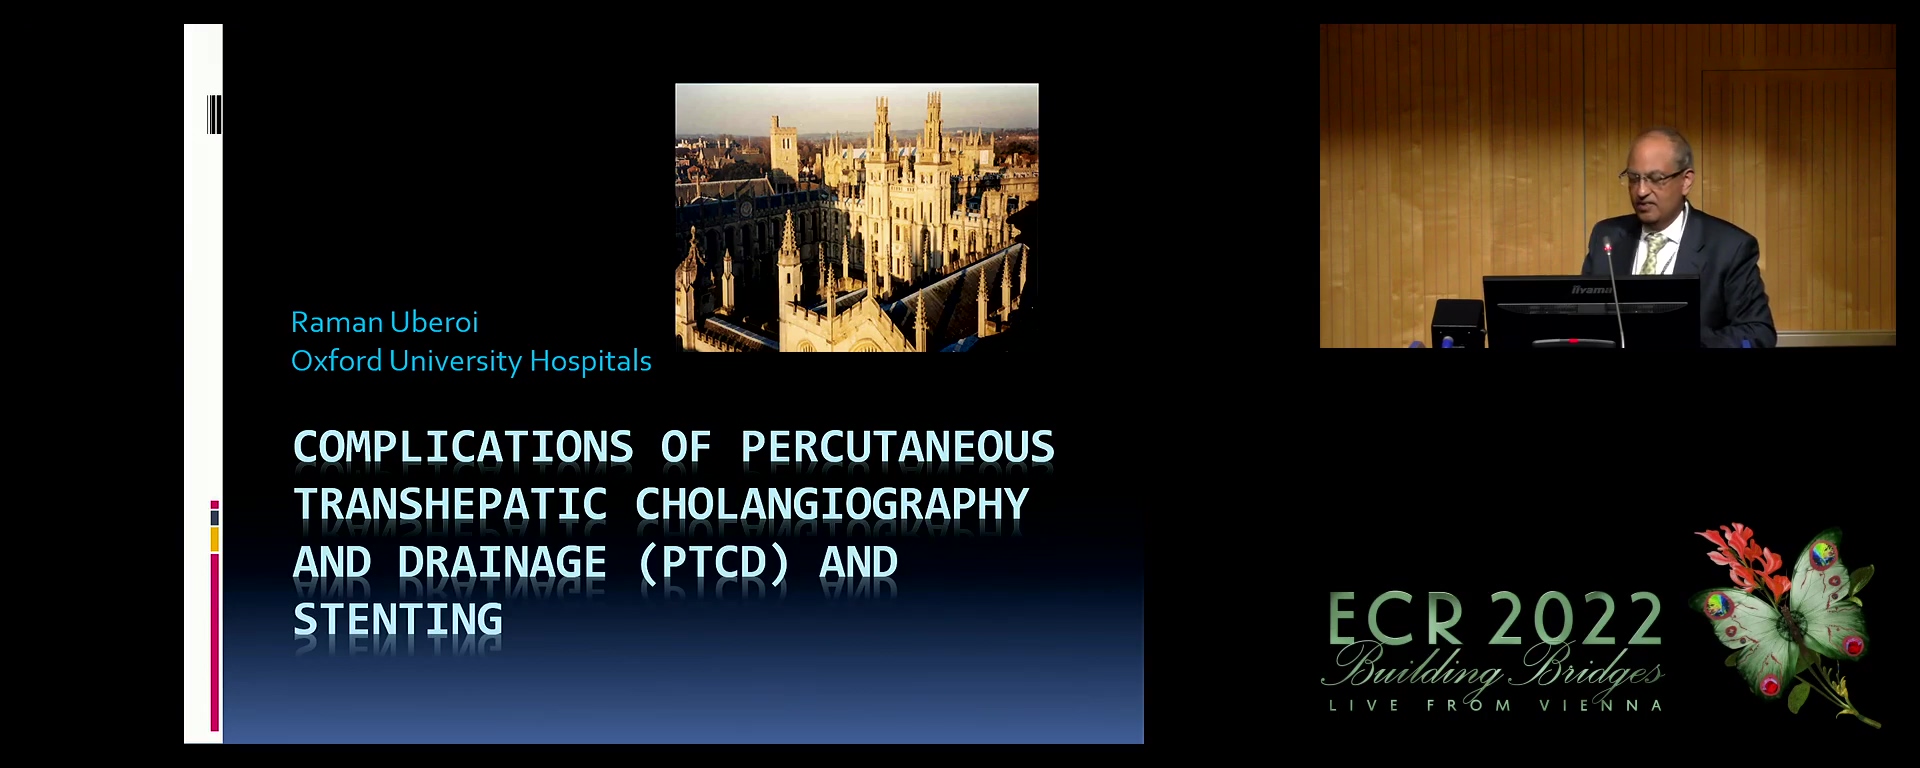 Complications of percutaneous transhepatic cholangiography and drainage (PTCD) and stenting - Raman Uberoi, Oxford / UK